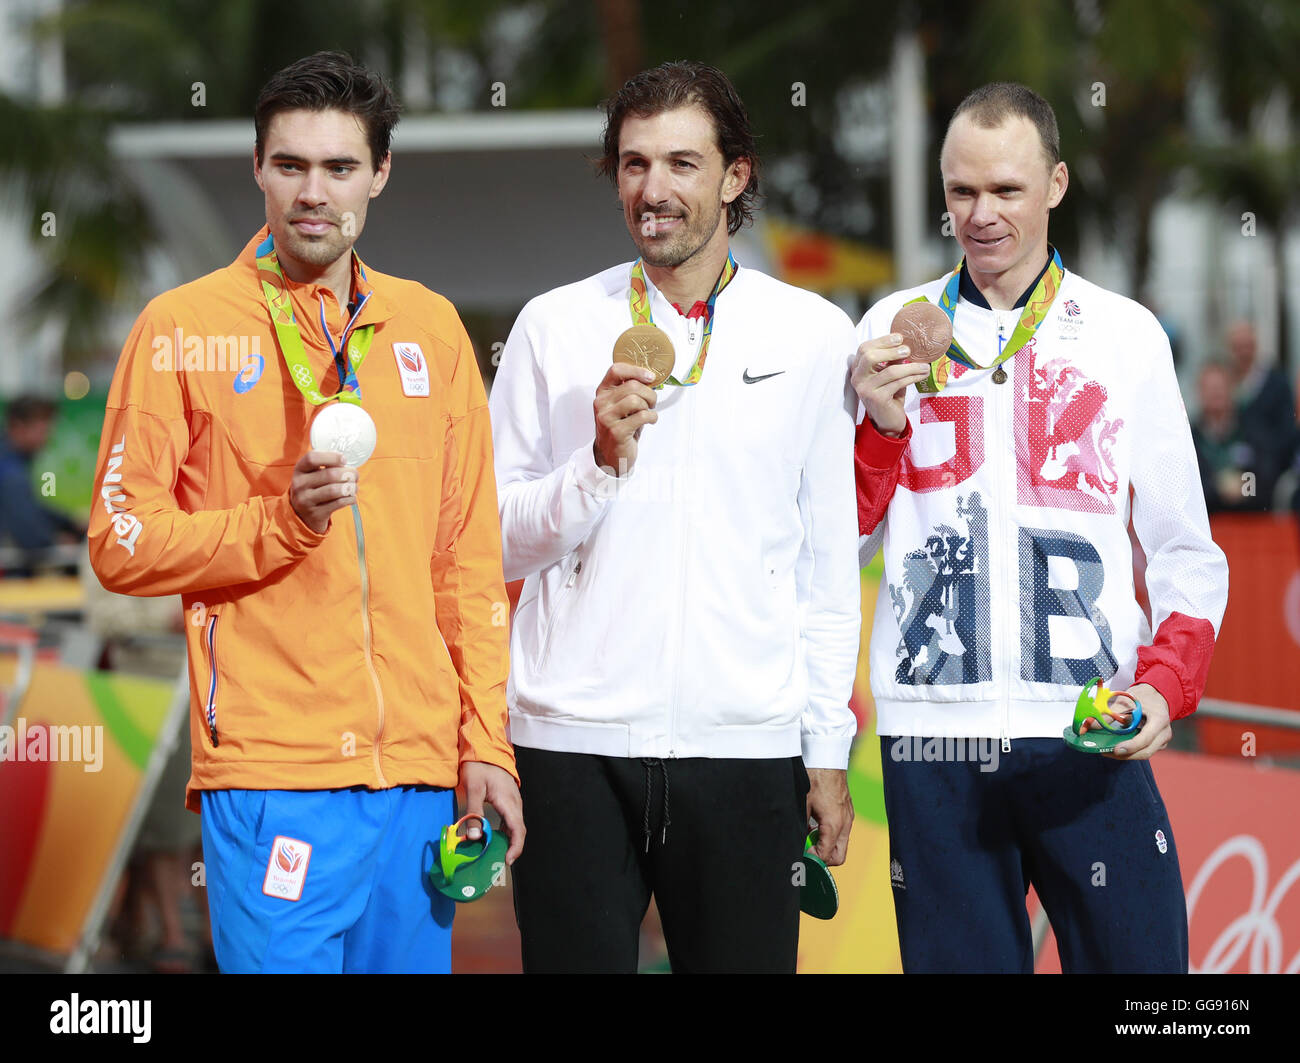 Rio De Janeiro, Brazil. 10th Aug, 2016. Fabian Cancellara of Switzerland (C), Tom Dumoulin of Netherlands (L) and Christopher Froome of Great Britain celebrate at the awarding ceremony of the men's individual time trial of cycling road at the 2016 Rio Olympic Games in Rio de Janeiro, Brazil, on Aug. 10, 2016. Fabian Cancellara won the gold medal with a time of 1:44:26.42. Credit:  Ren Zhenglai/Xinhua/Alamy Live News Stock Photo